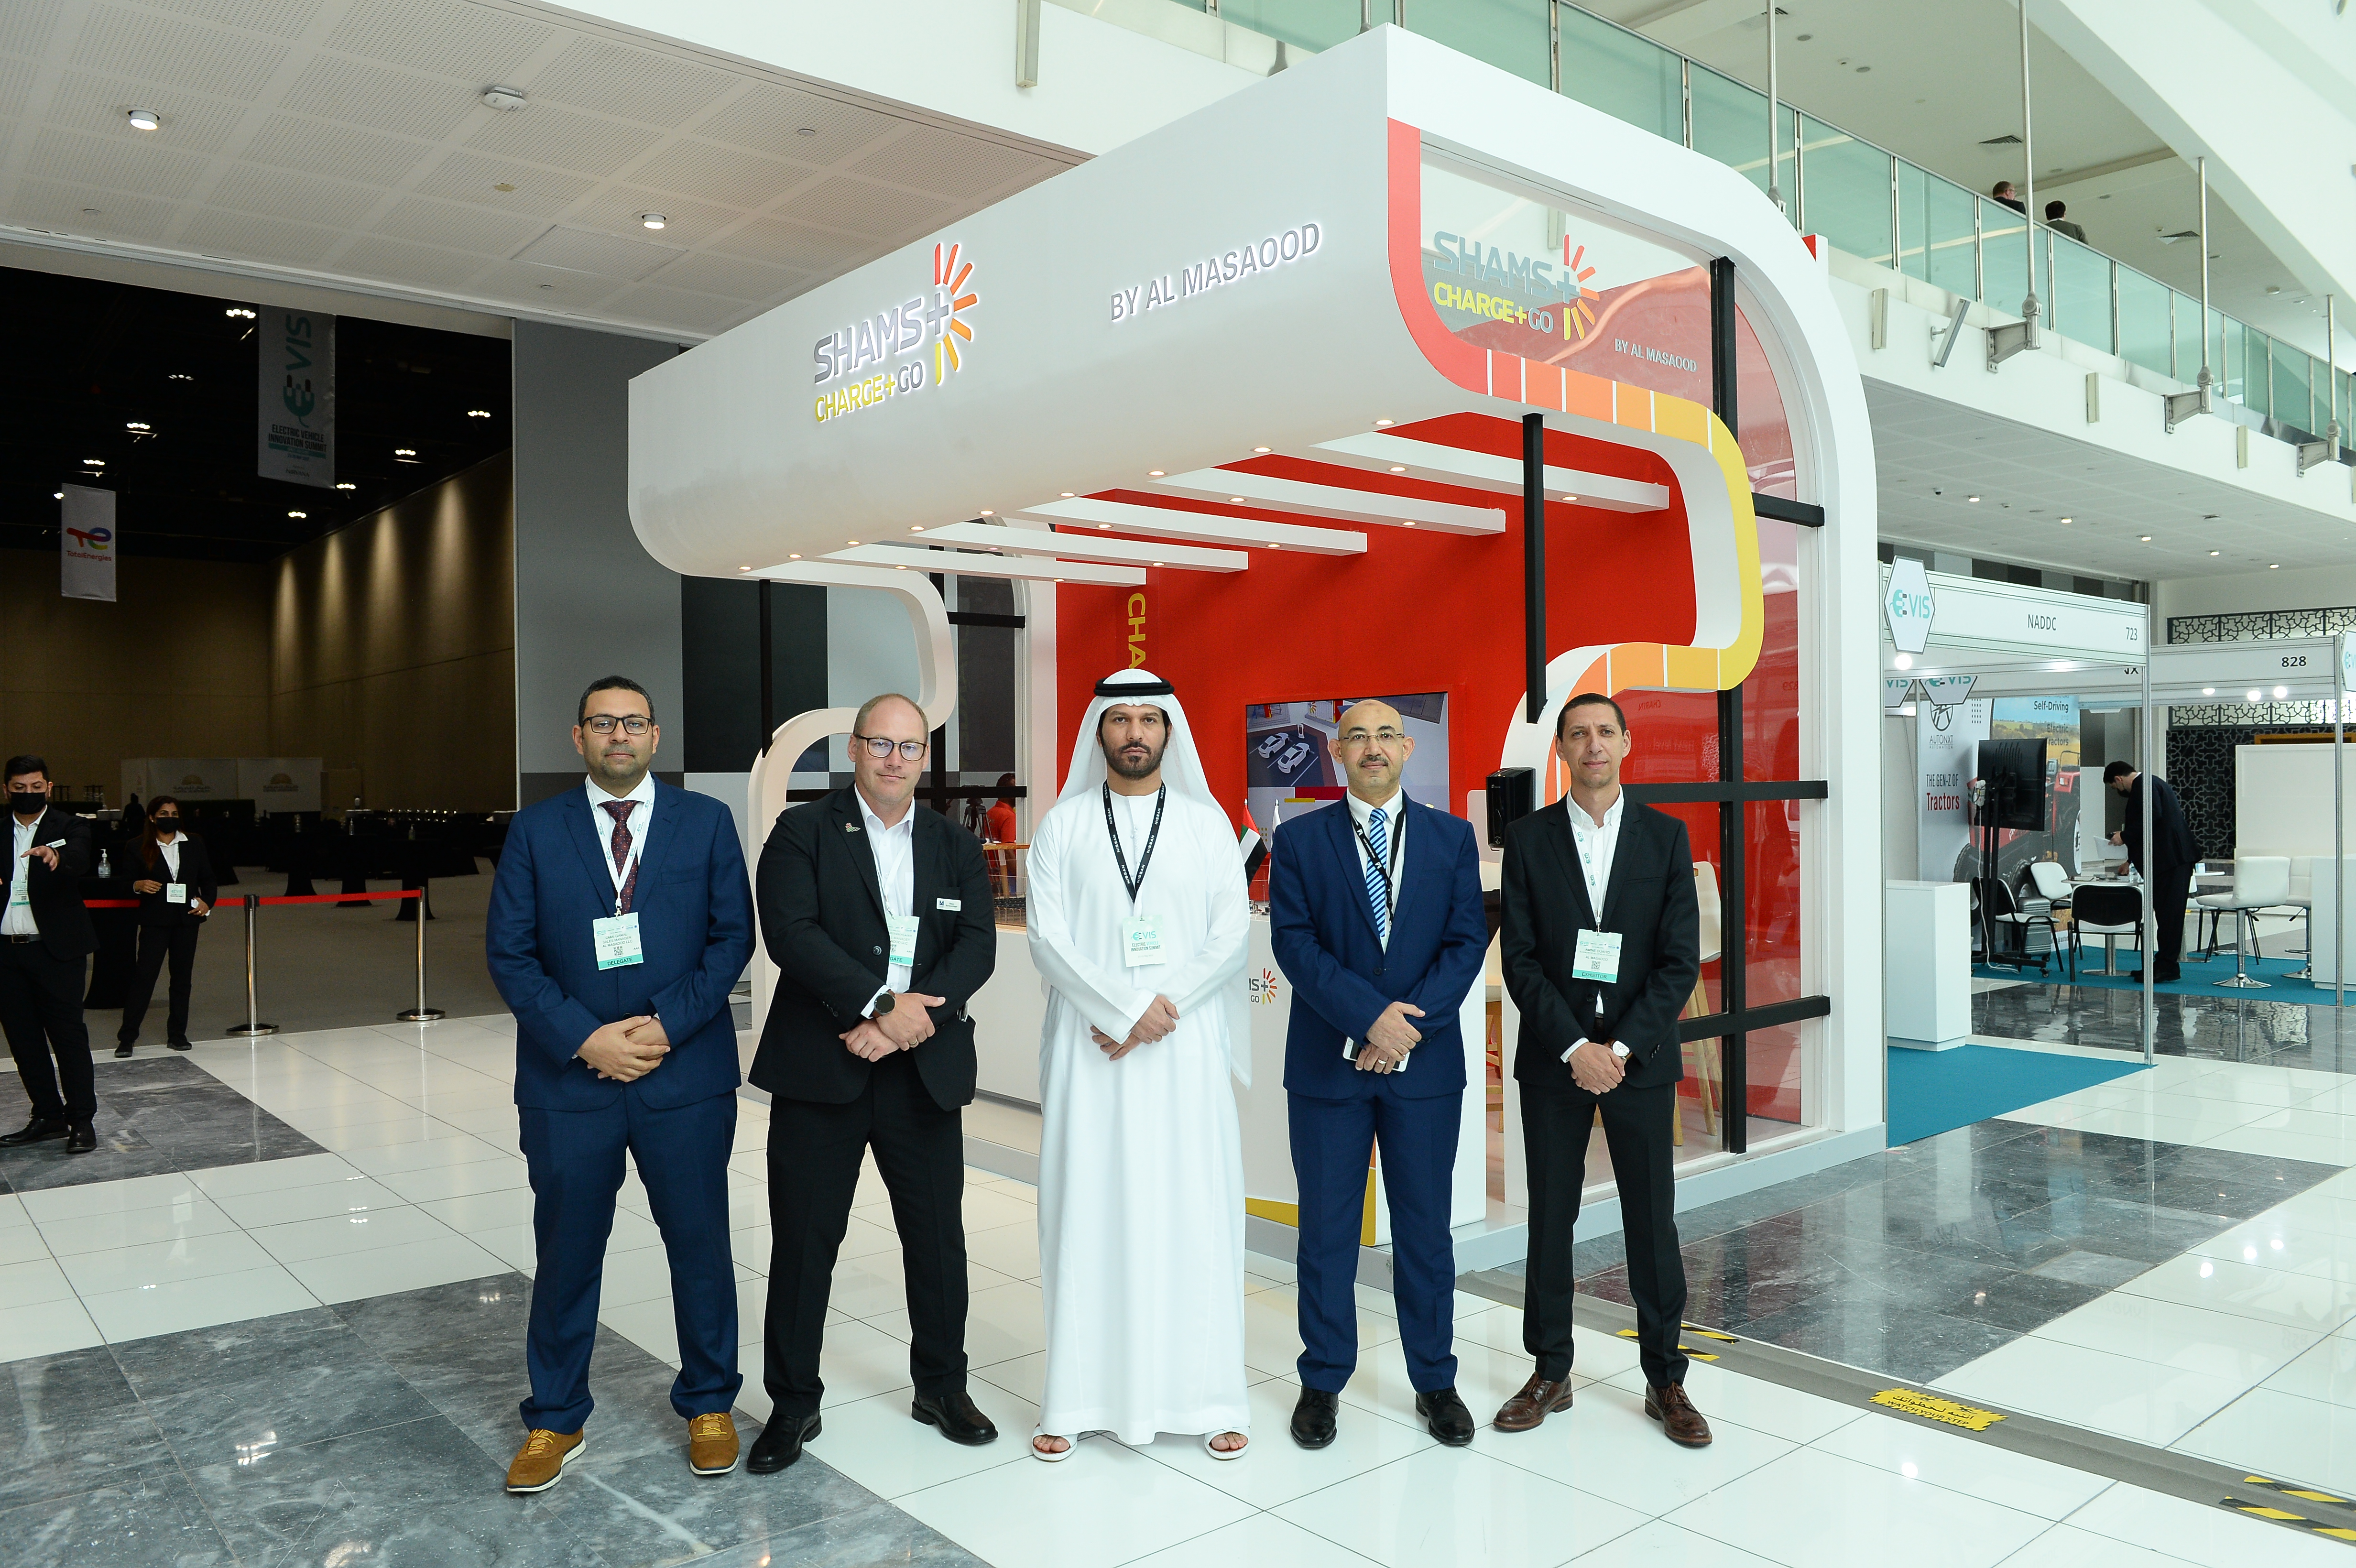 Al Masaood Power launches first UAE-built smart electric charging solution “SHAMS+” for EVs and hybrid marine vessels